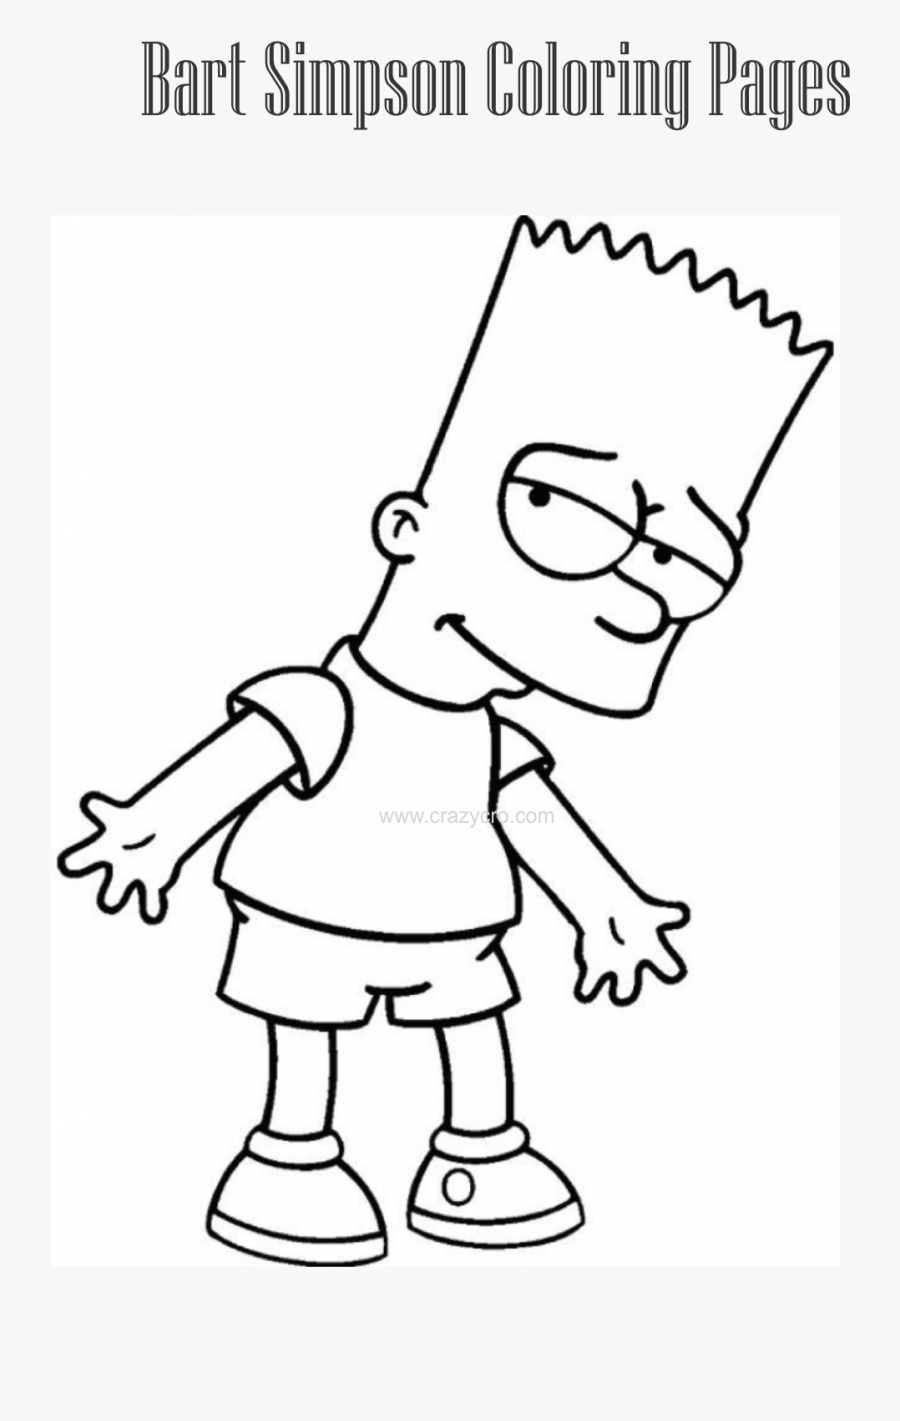 Transparent Bart Simpson Png - Simple Cartoon Characters Drawing, Transparent Clipart